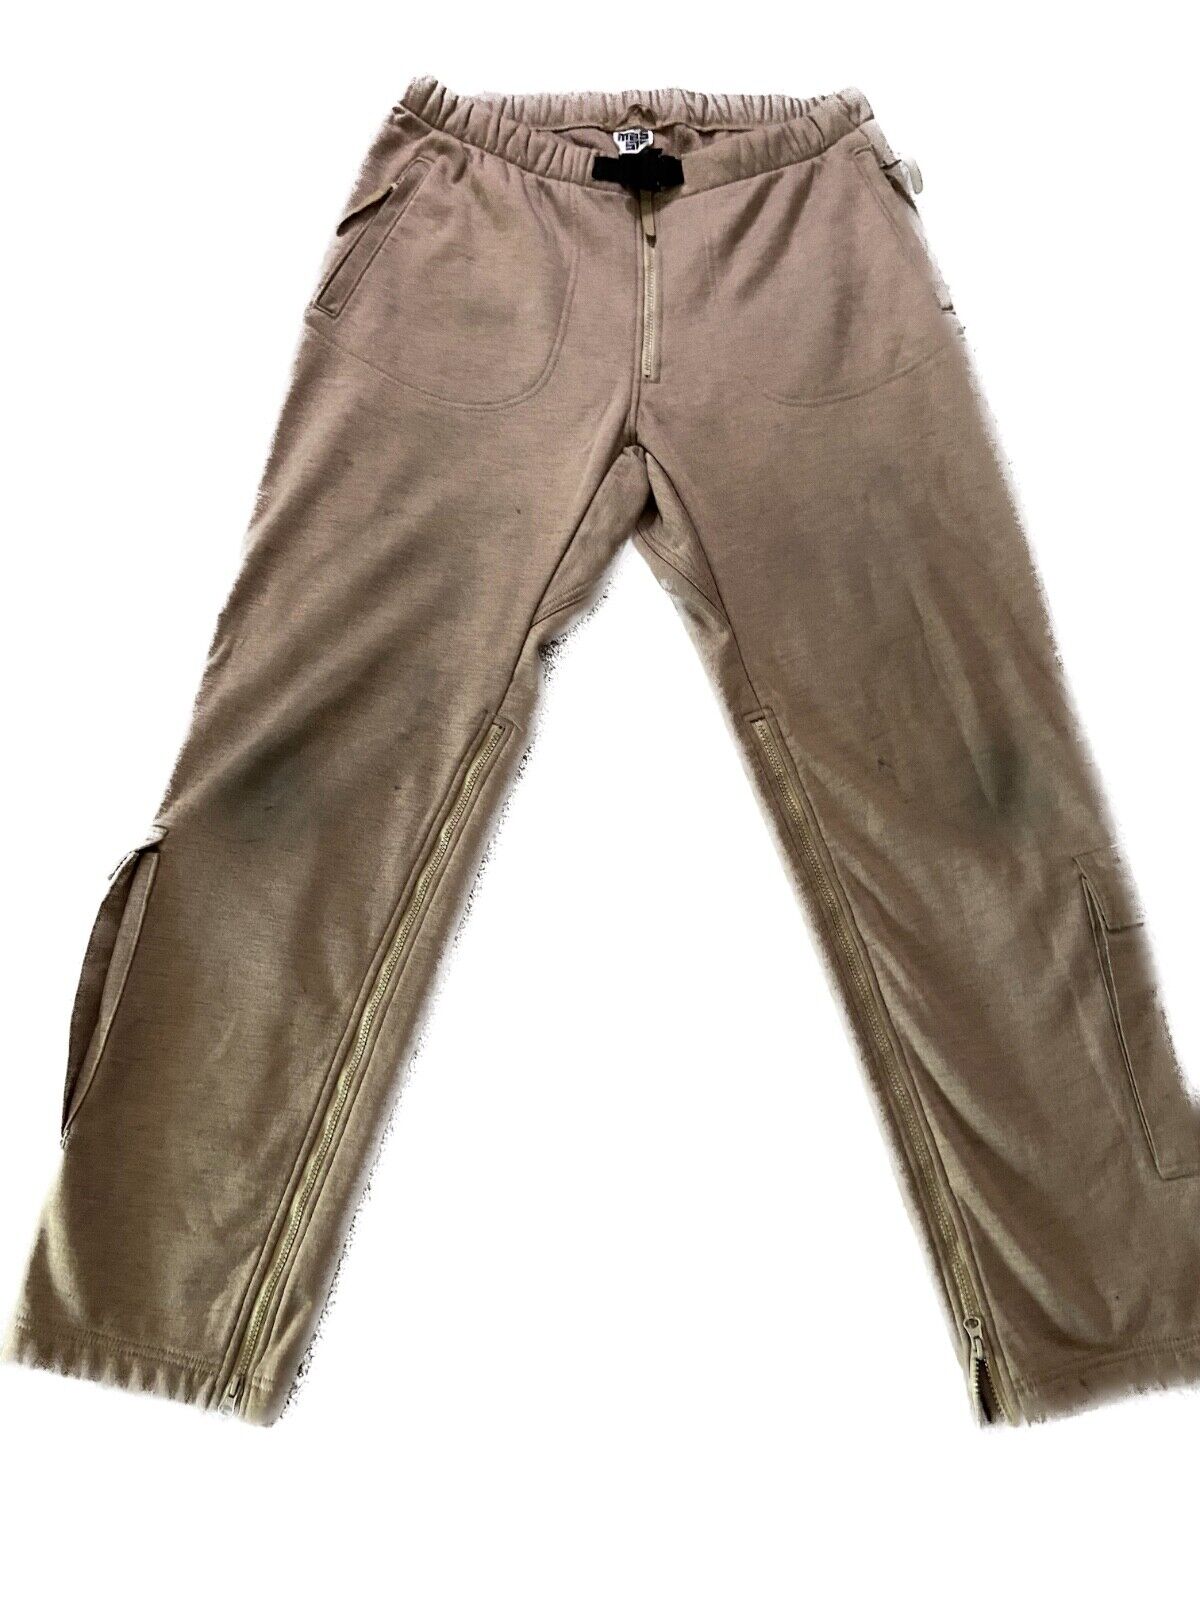 Massif Elements Pants Navair Flame Resistant L Tan FR Pant Pockets Made in USA